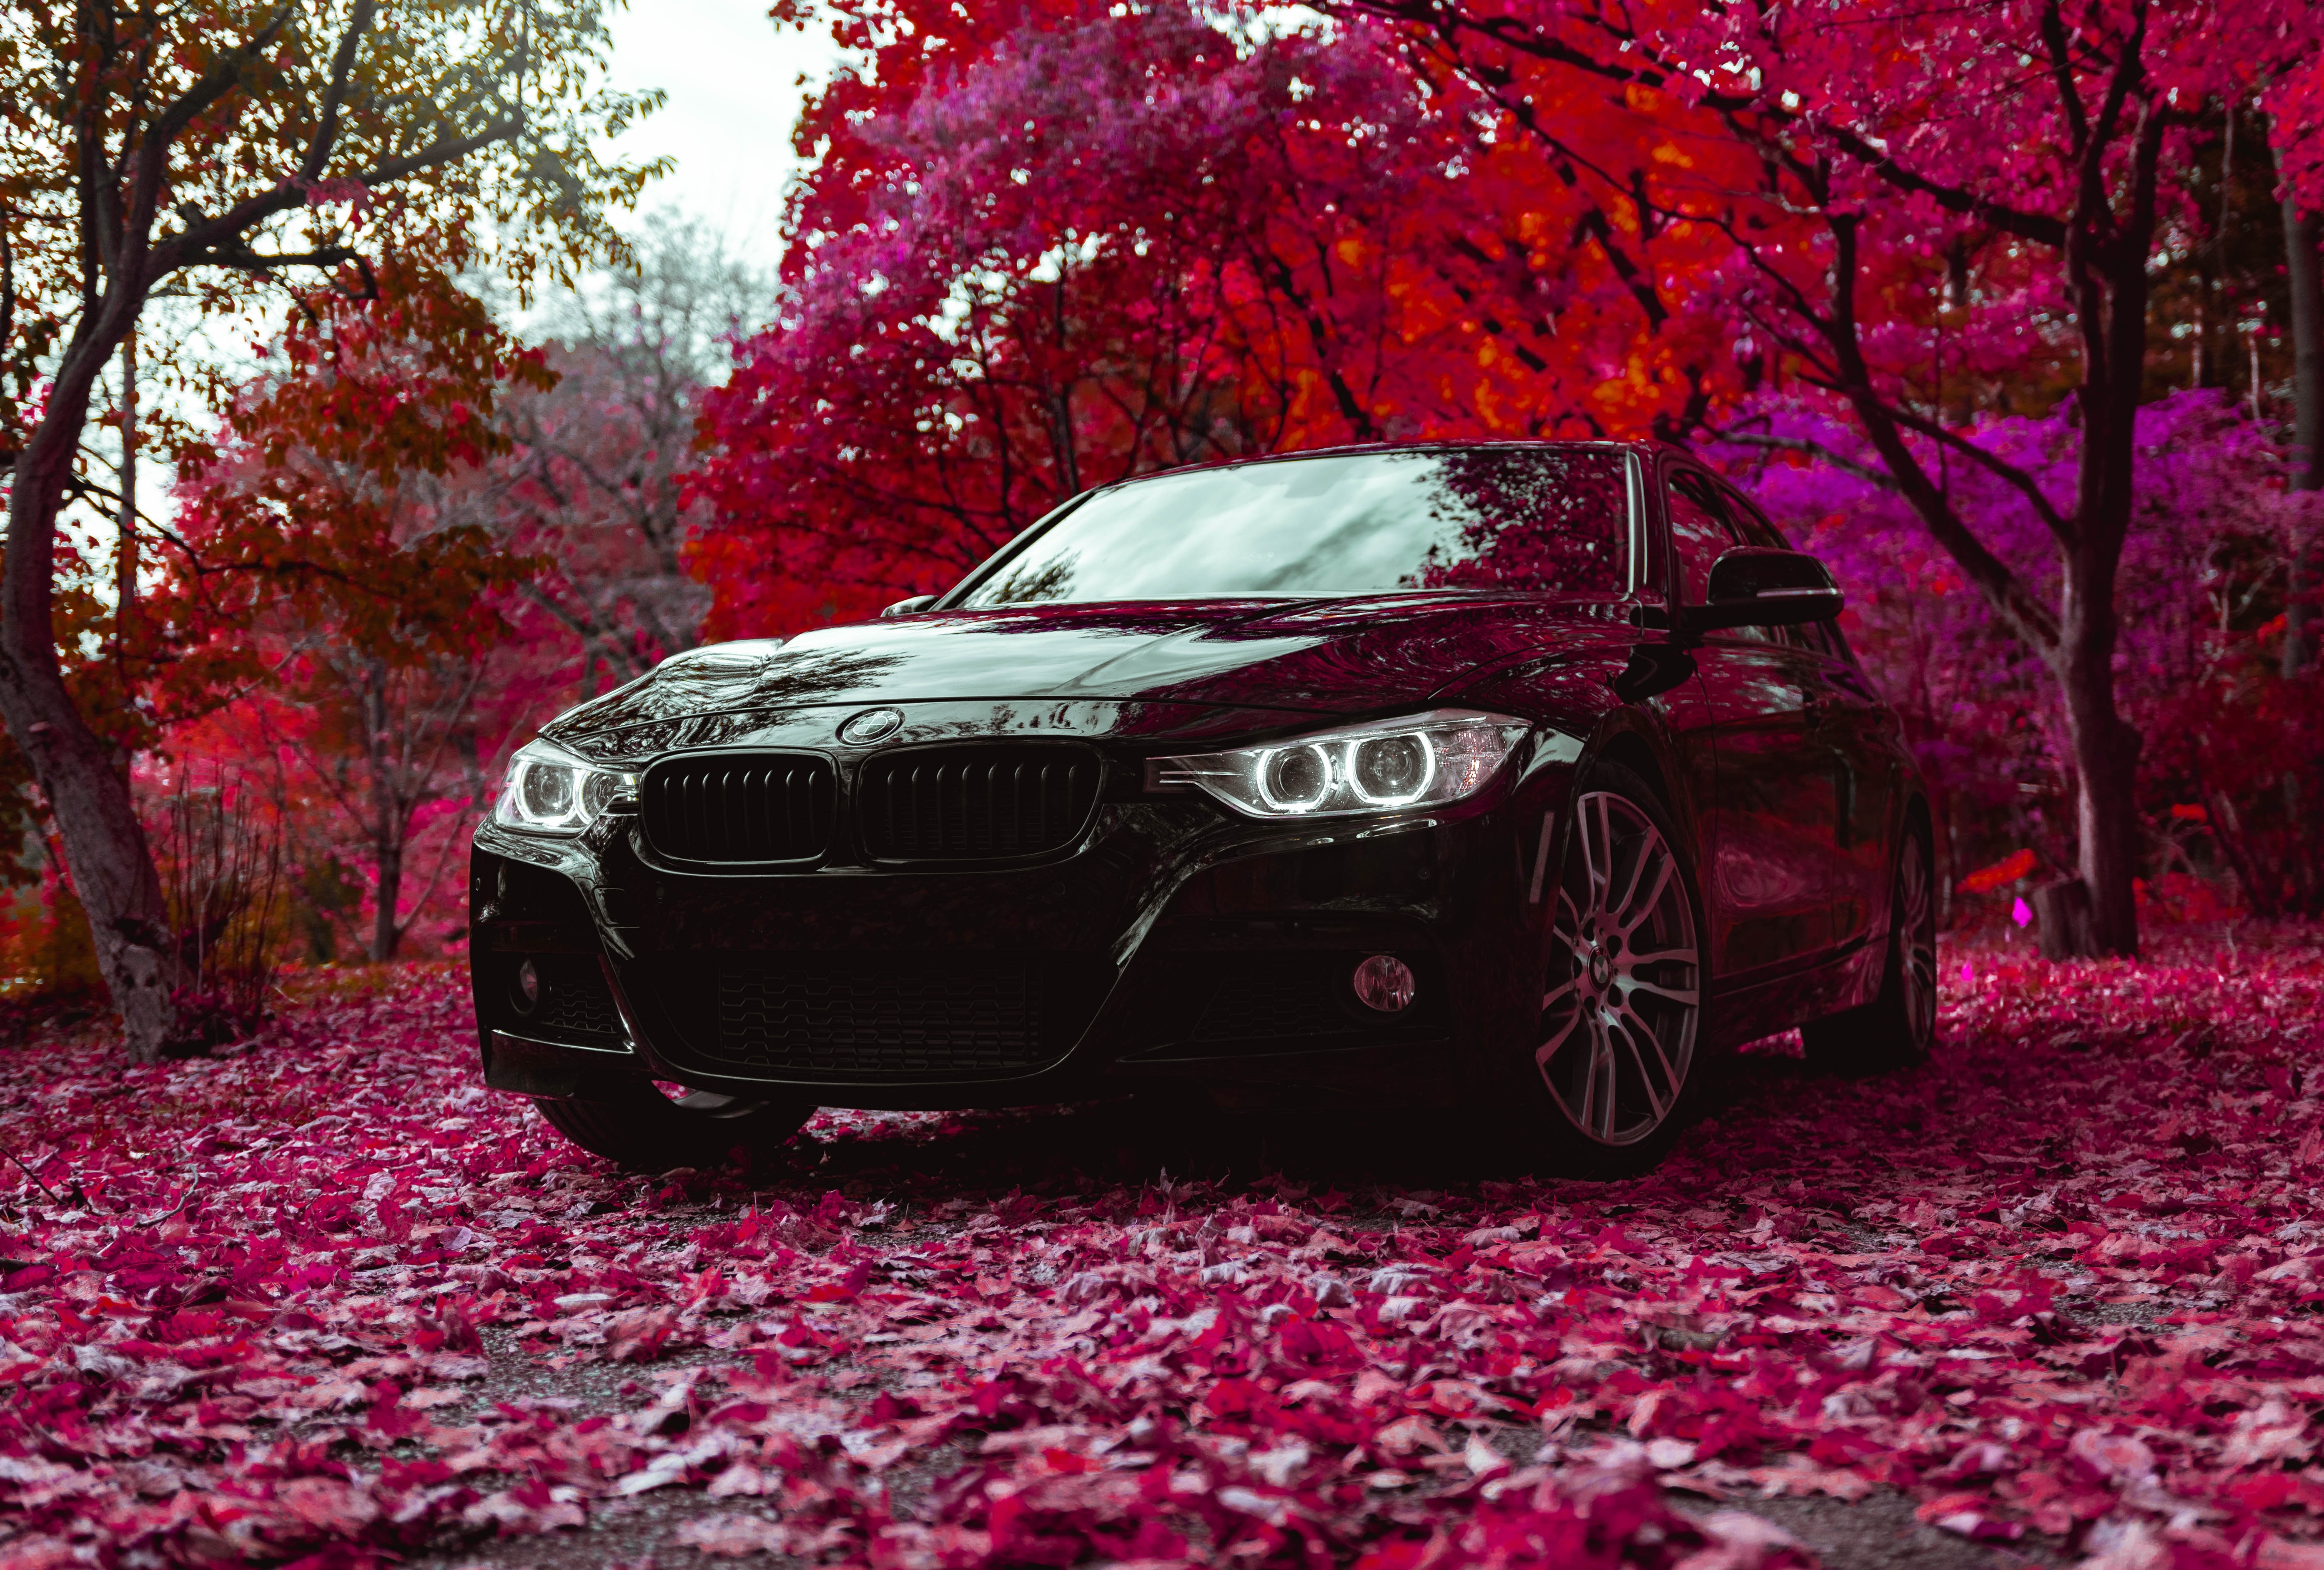 New Lock Screen Wallpapers bmw, cars, black, car, front view, machine, bmw f30 335i